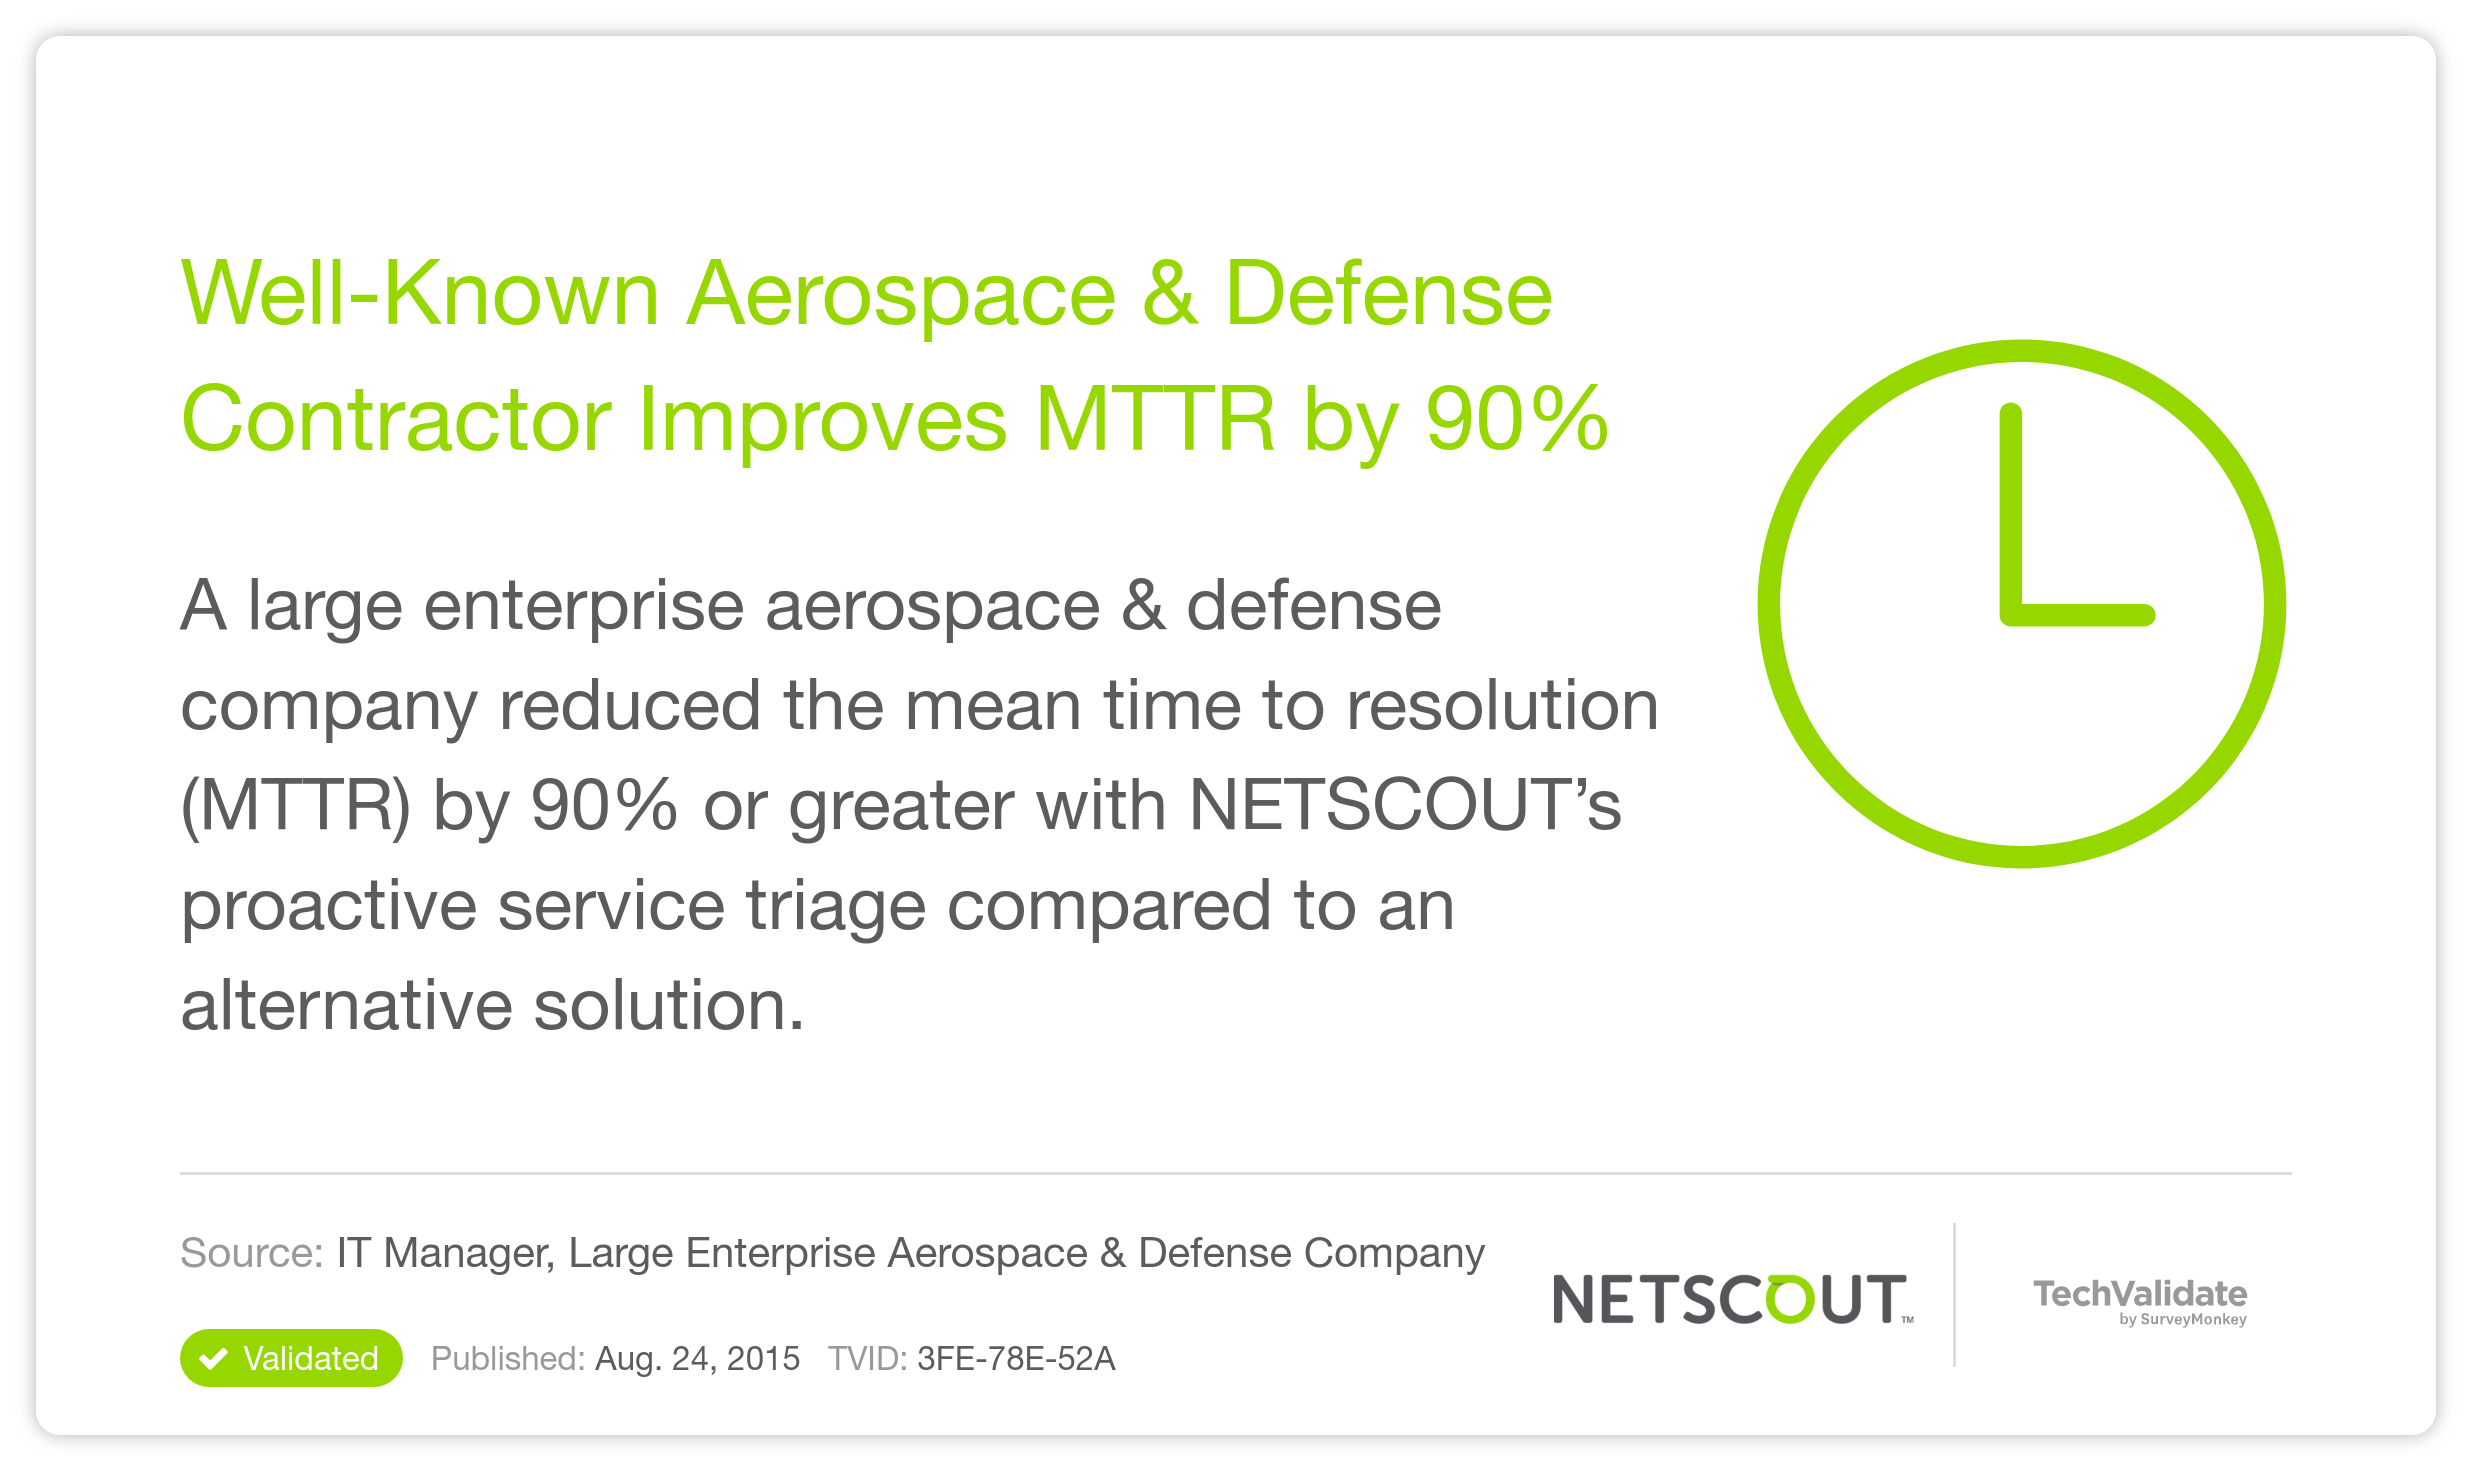 Well-Known Aerospace & Defense Contractor Improves MTTR by 90%